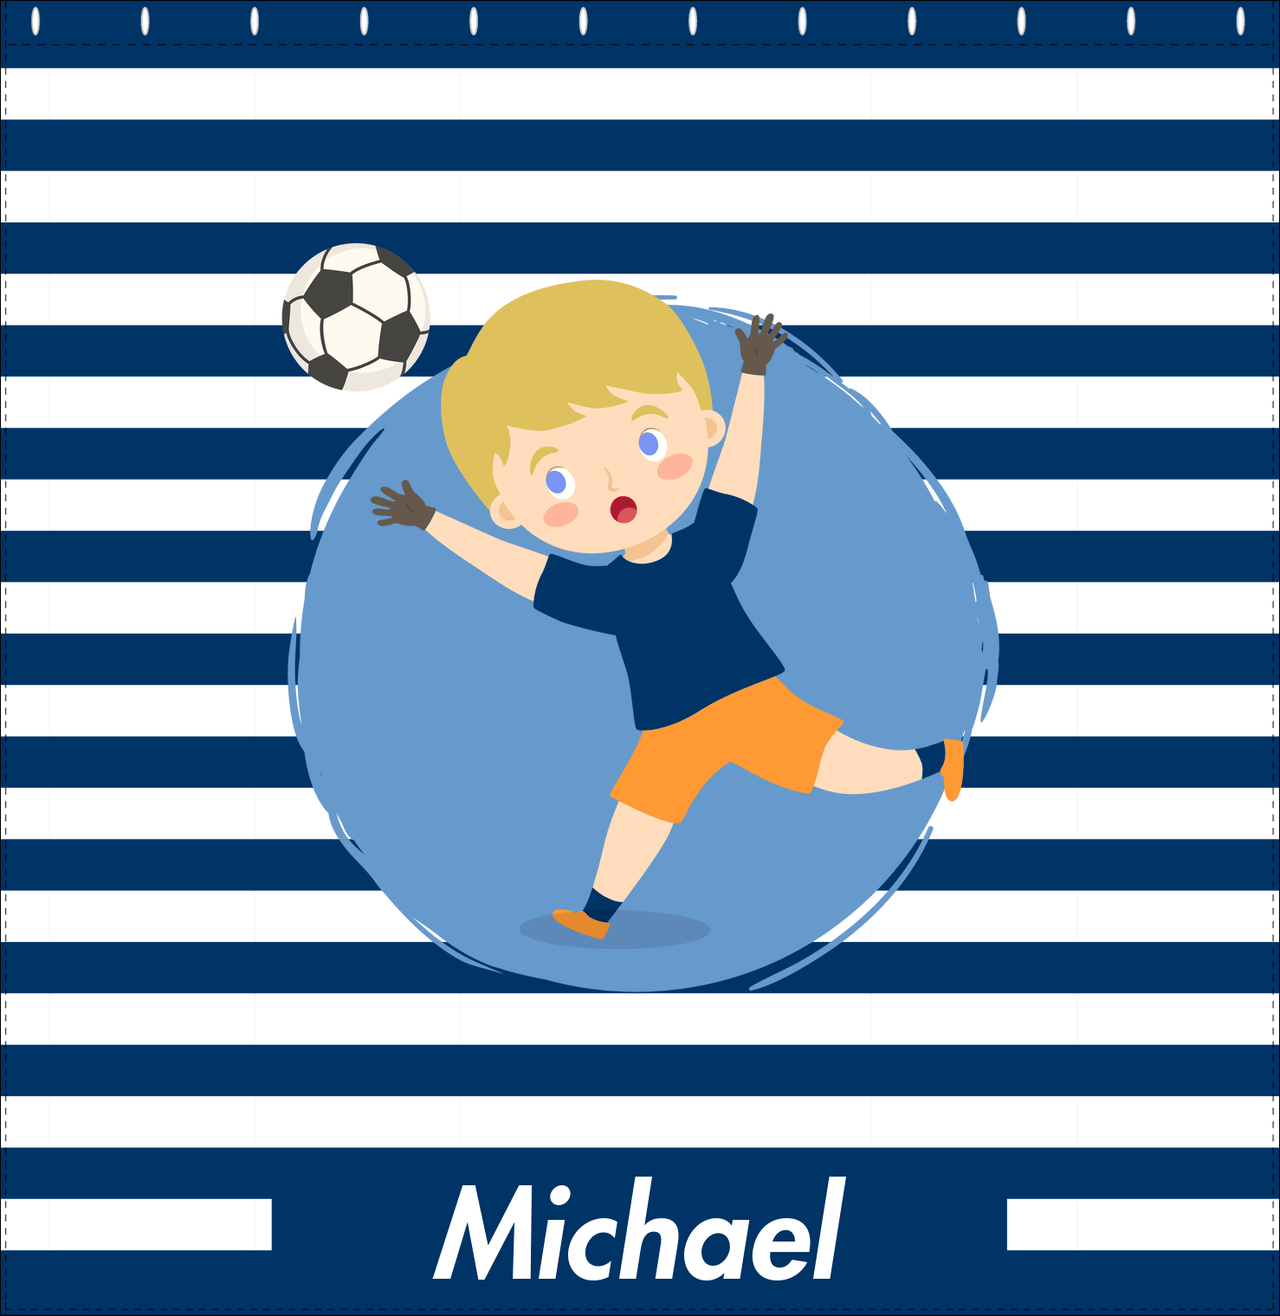 Personalized Soccer Shower Curtain XXIV - Blue Background - Blond Boy II - Decorate View